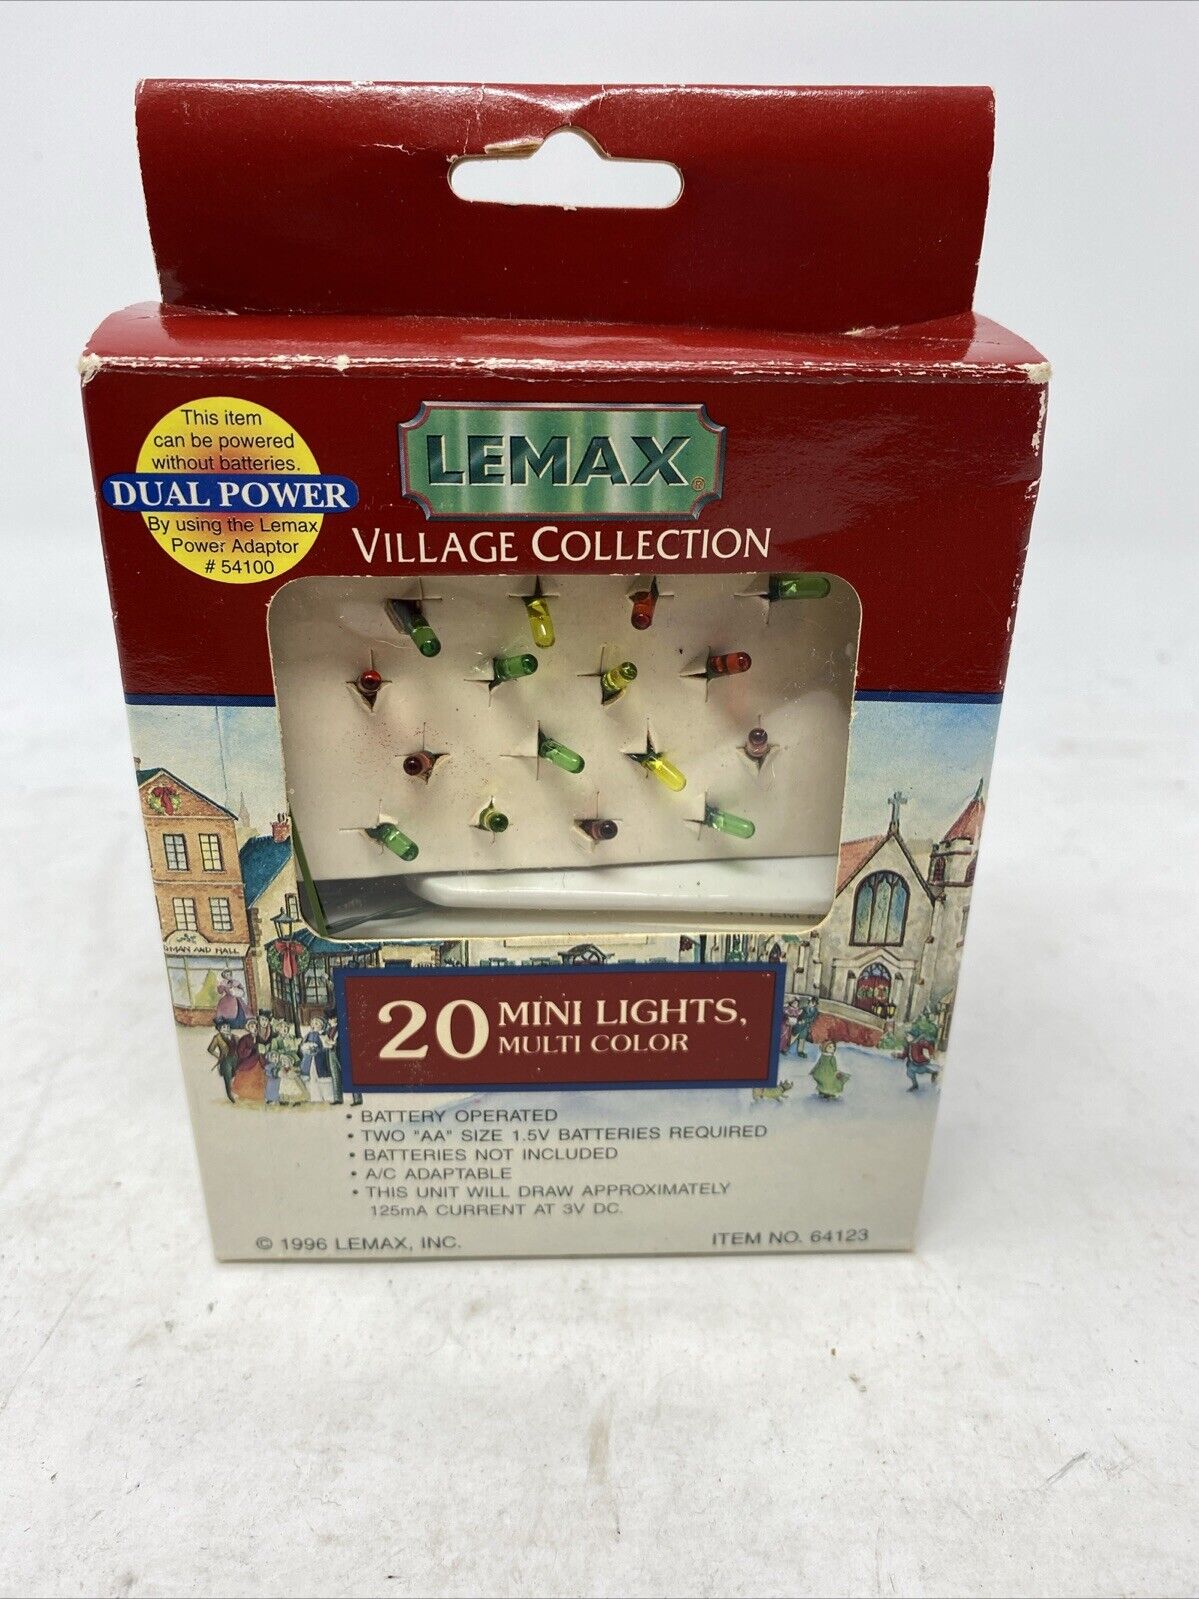 Lemax 20 Mini Lights Multi Color Christmas Village Battery Operated 1996 - Works